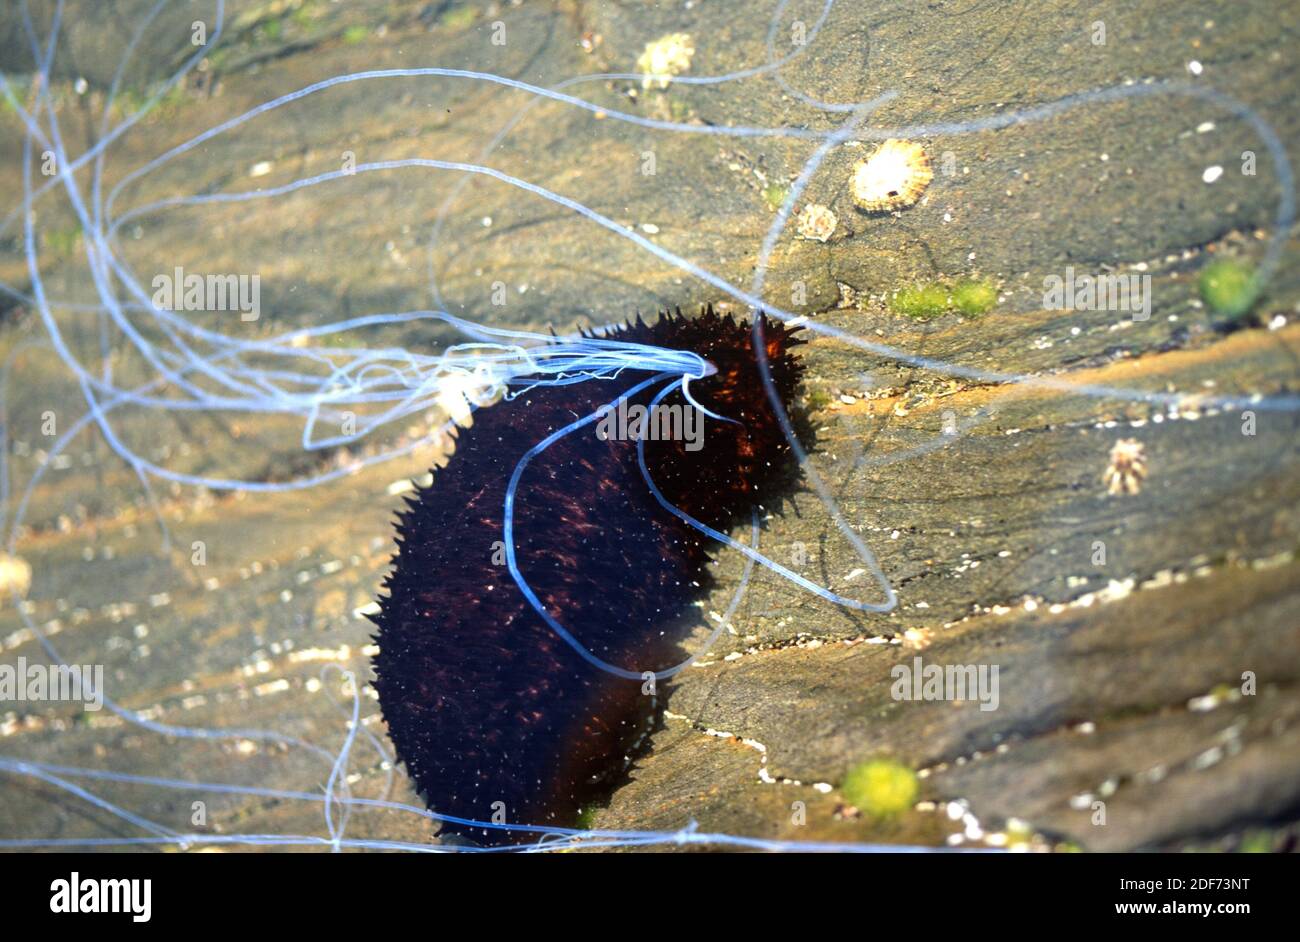 Black sea cucumber (Holothuria forskali). This specimen ejects sticky filaments from the anus in self-defense. This photo was taken in Cap Creus, Stock Photo